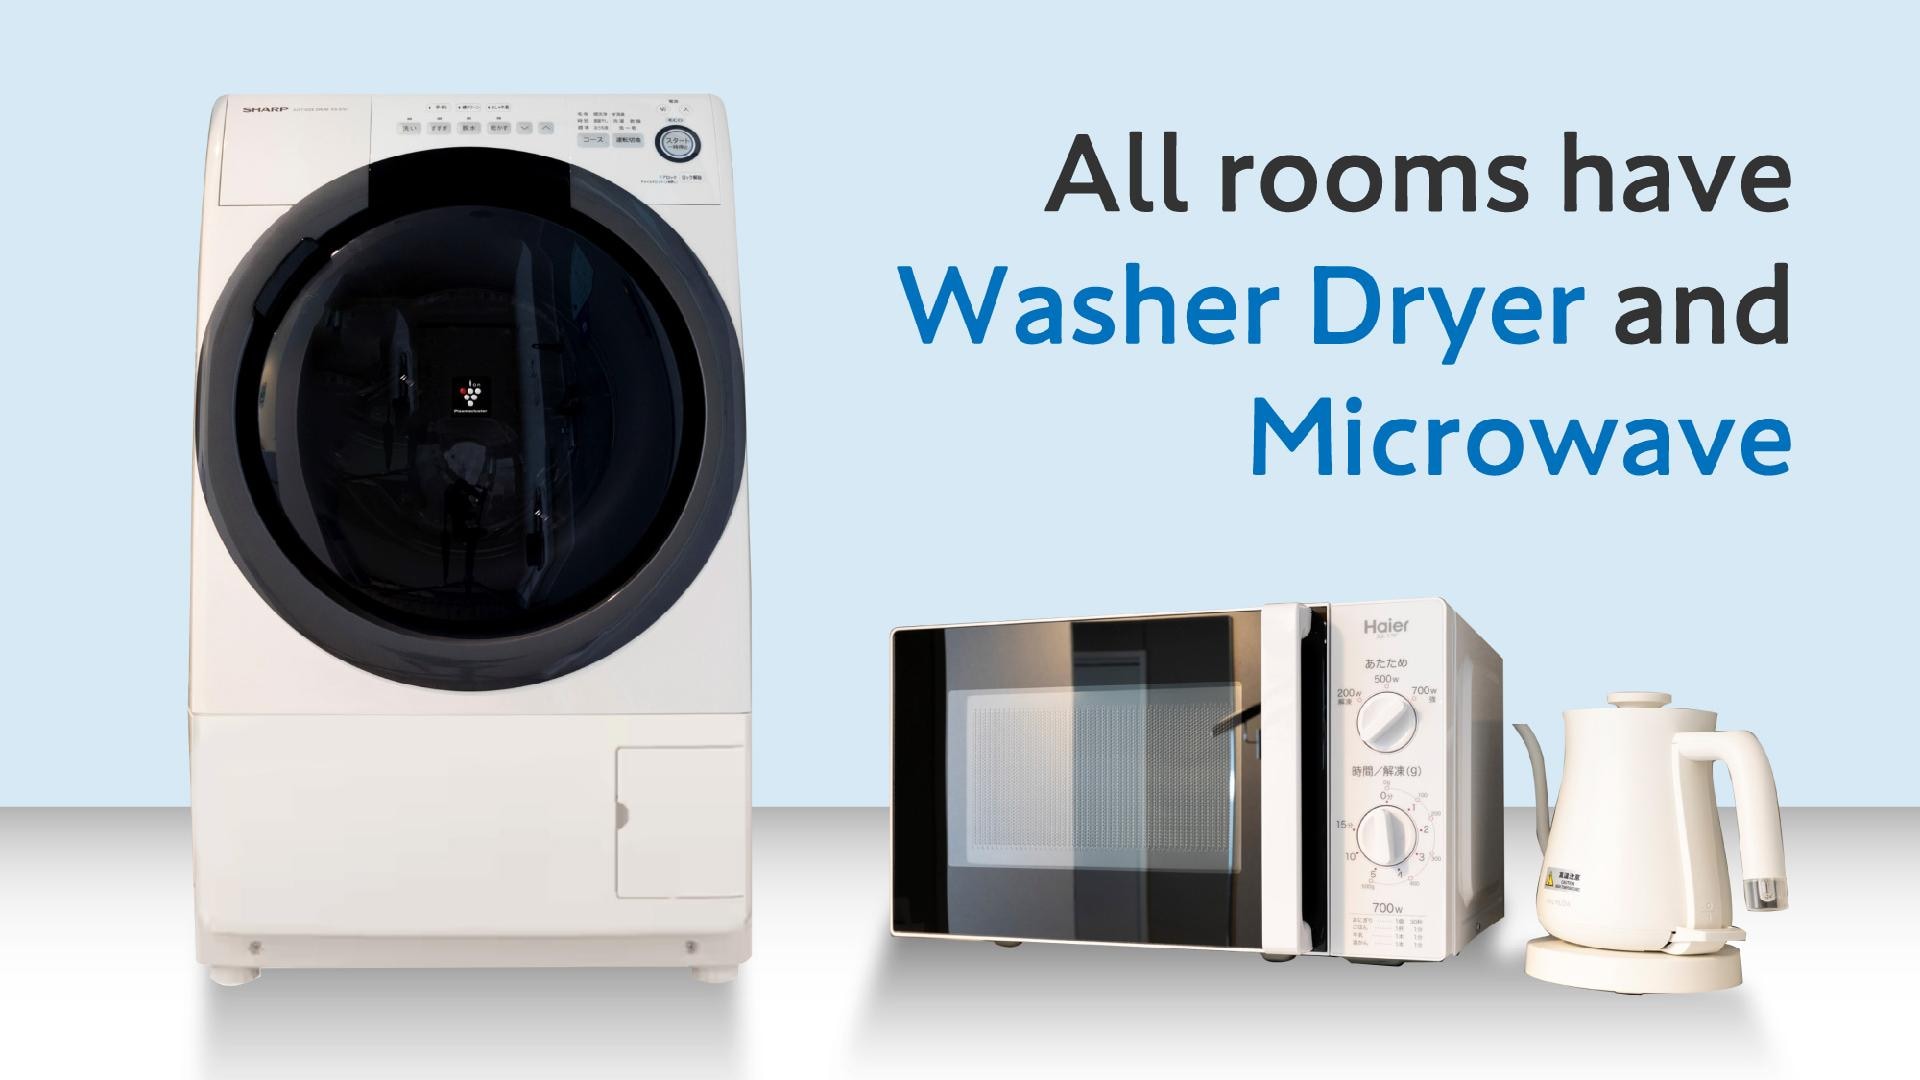 All rooms are equipped with washer/dryers, microwave ovens, and electric kettles.